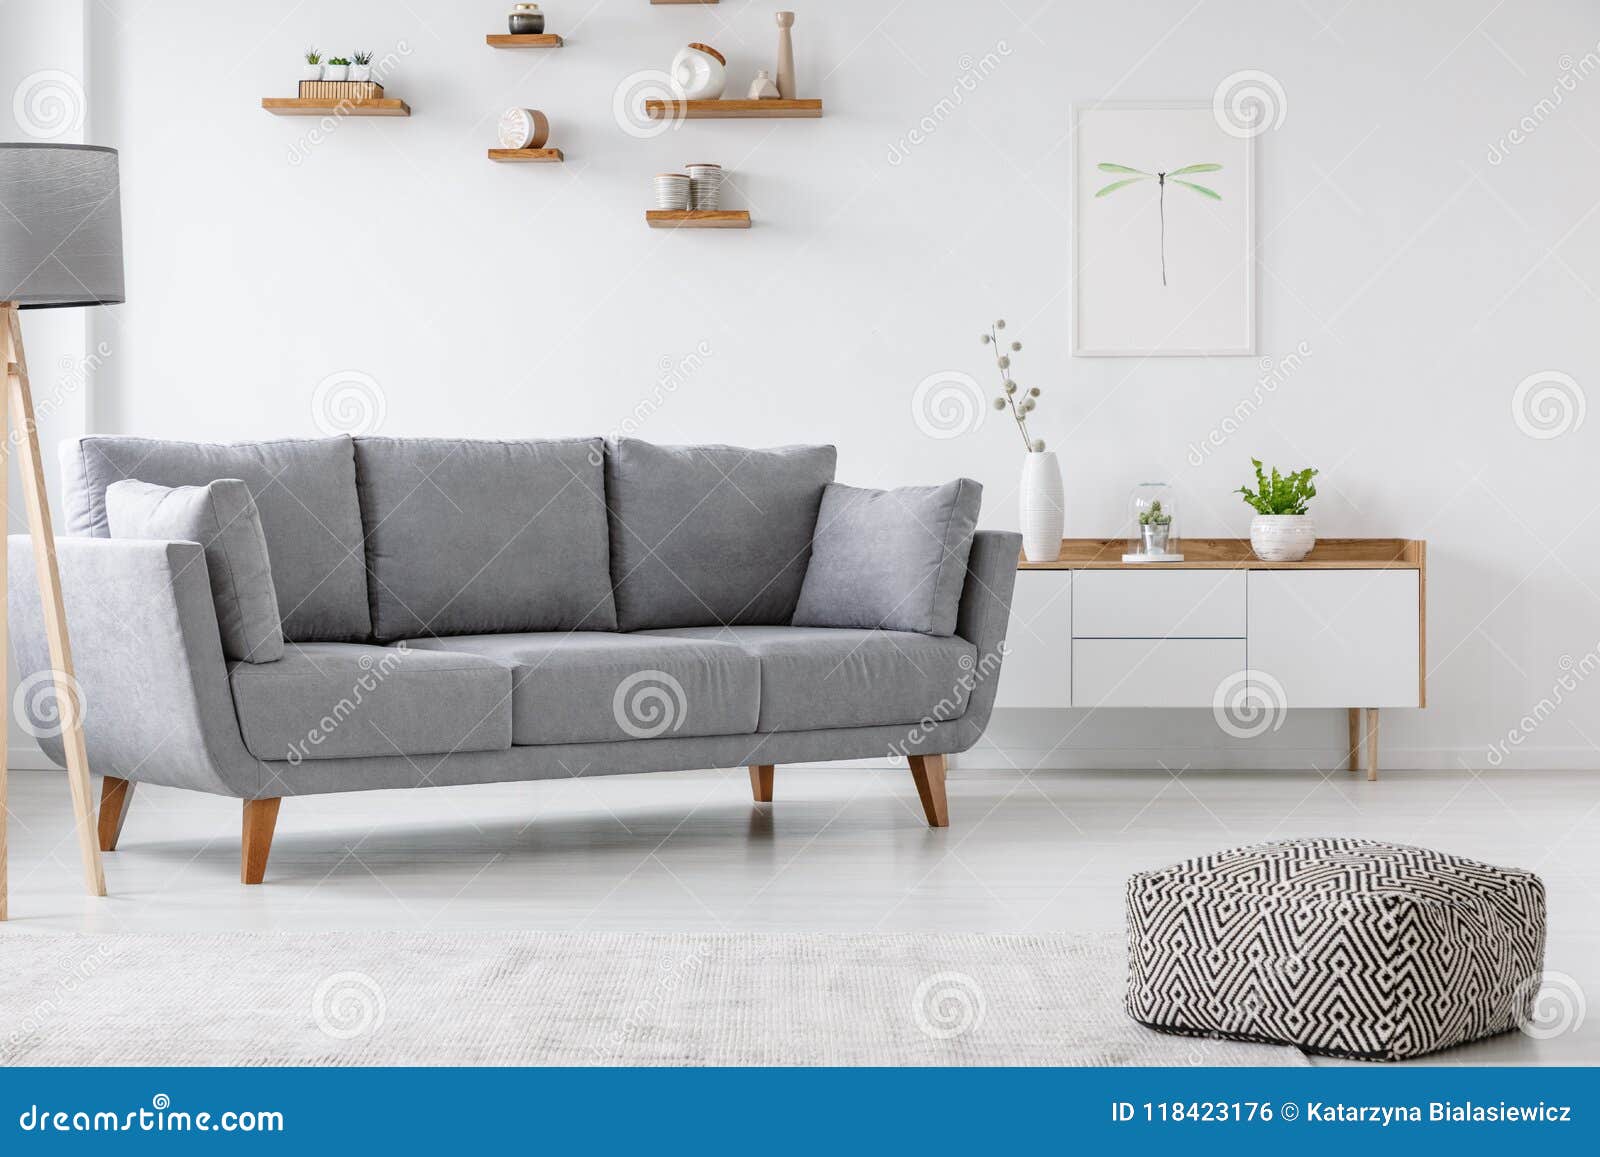 patterned pouf and grey couch in minimal living room interior wi